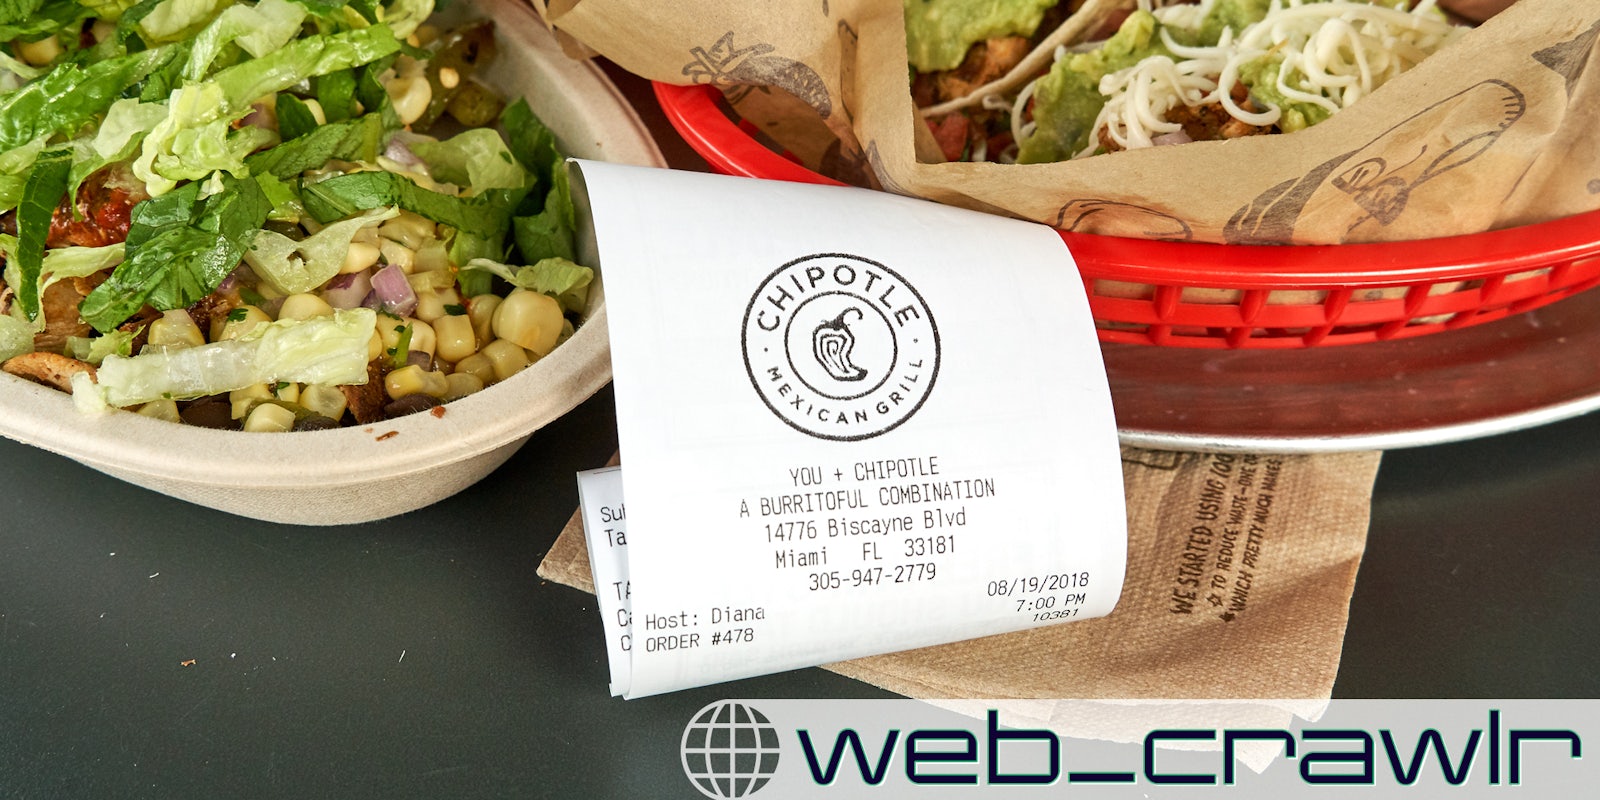 A Chipotle order. The Daily Dot newsletter web_crawlr logo is in the bottom right corner.